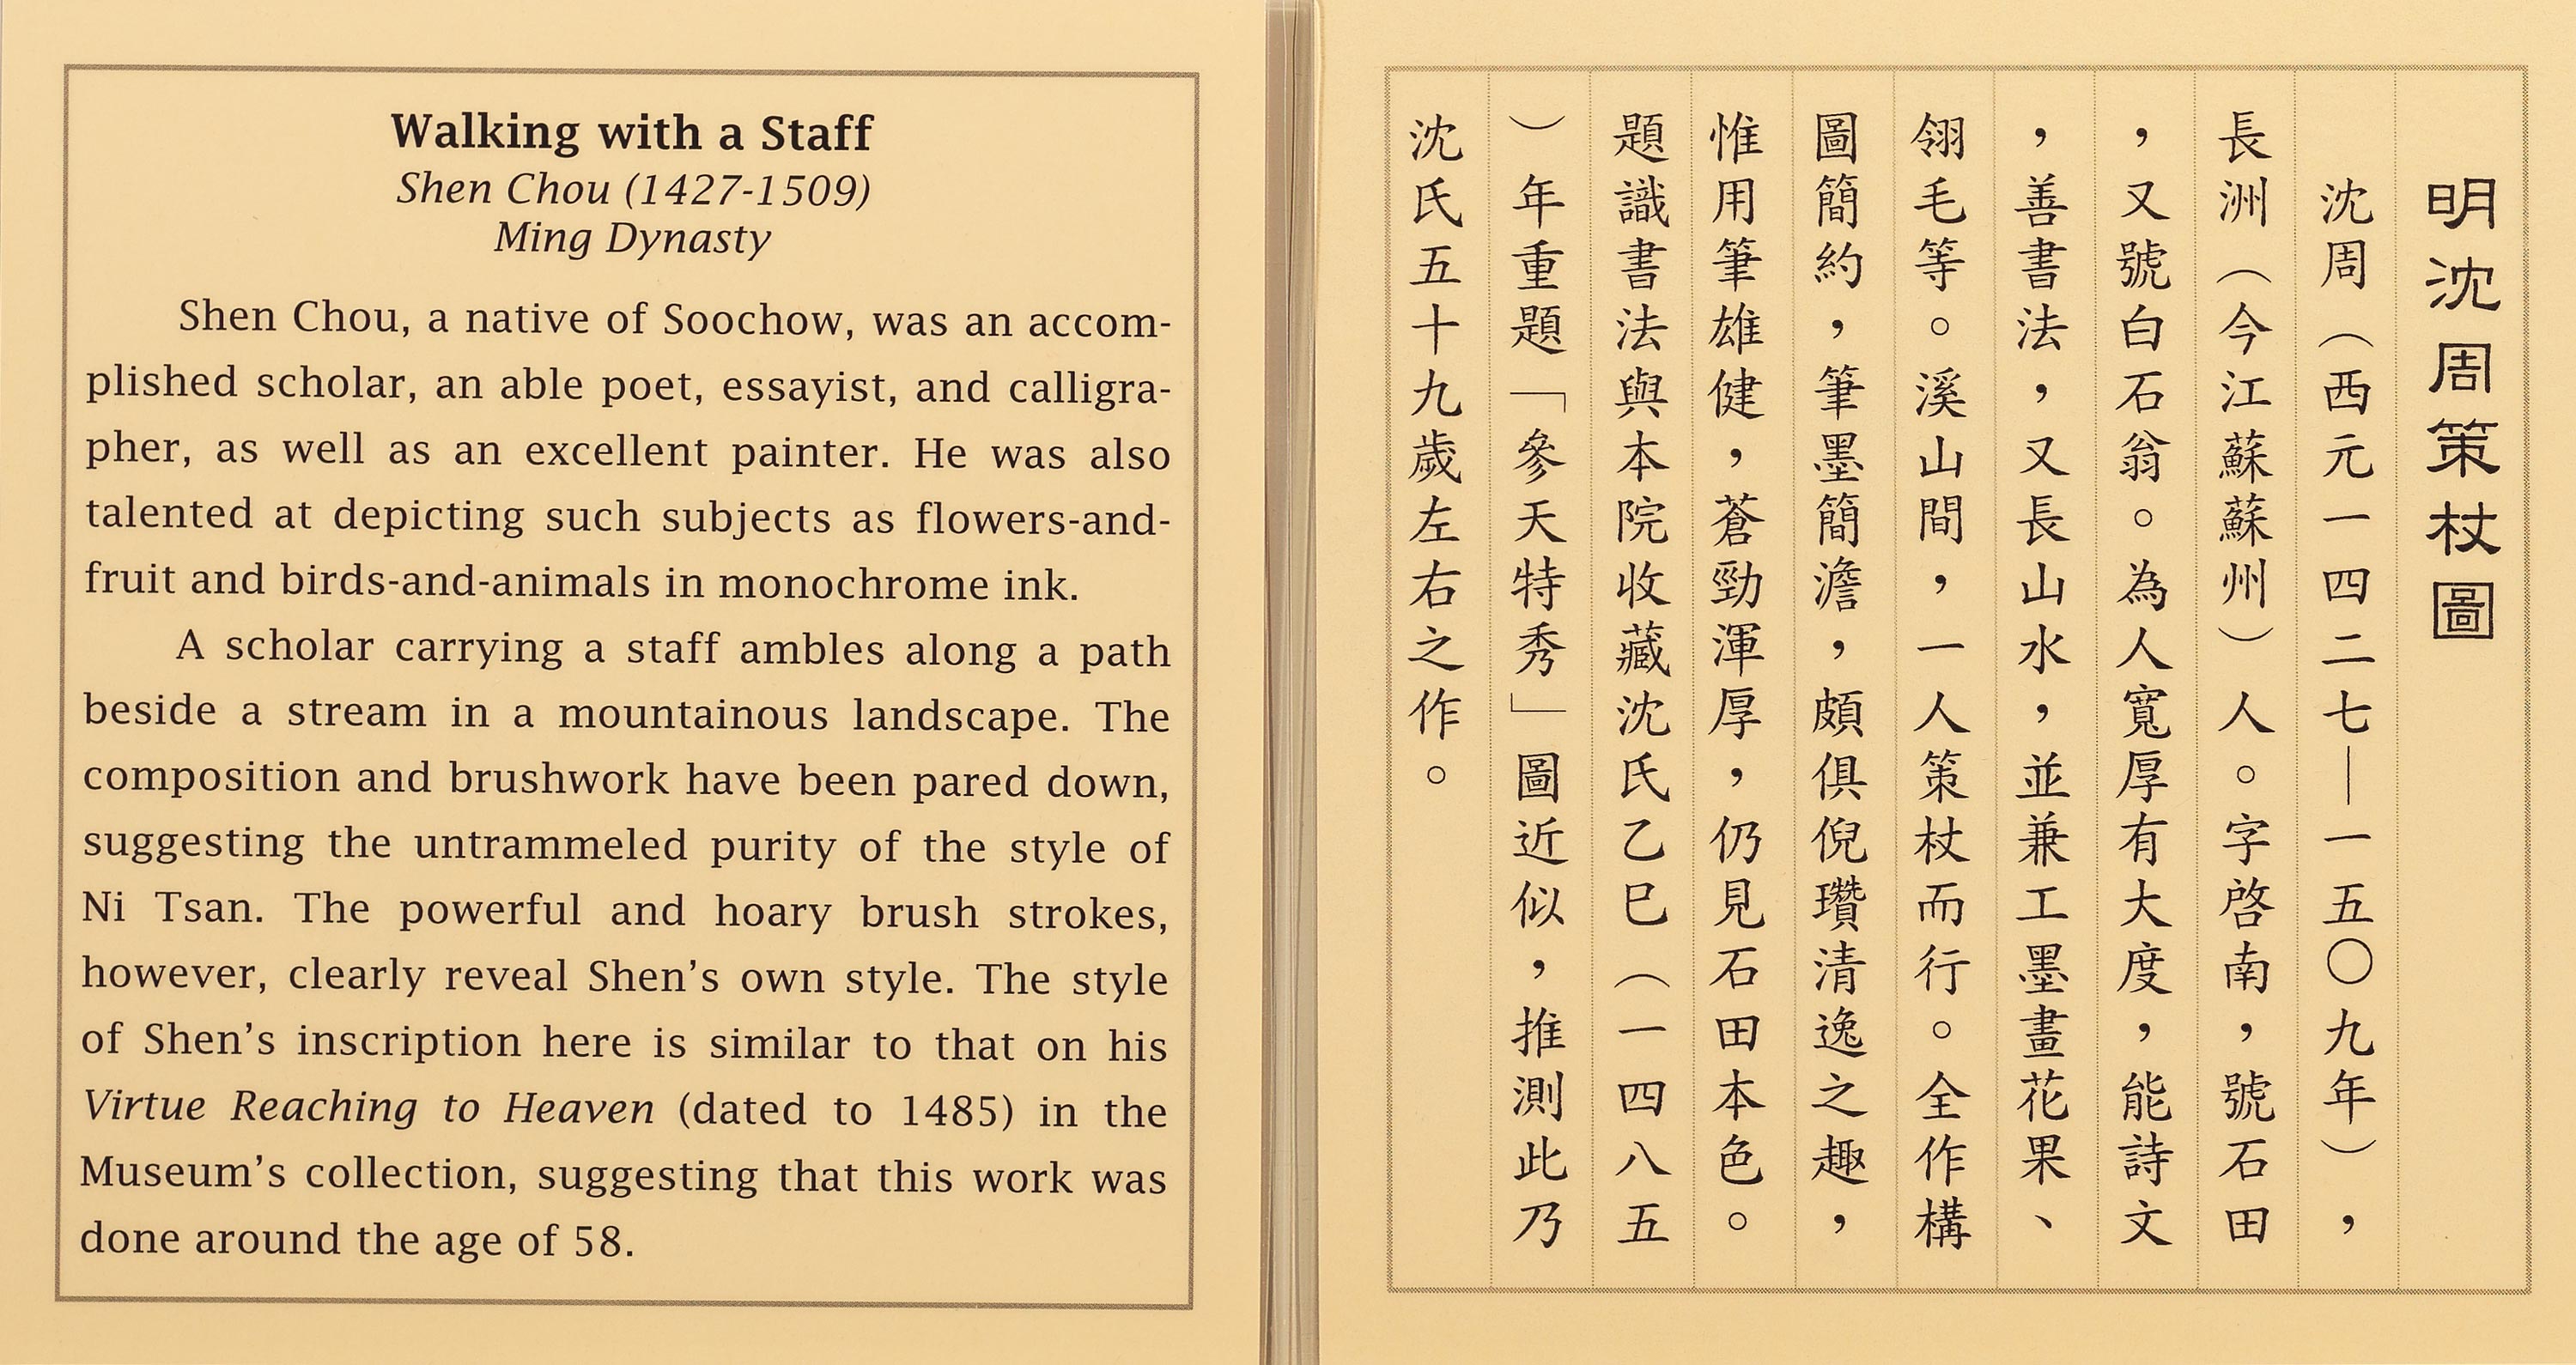 In the first decade of the 2000s, a new version of explanatory cards with larger text in both Chinese and English was designed.